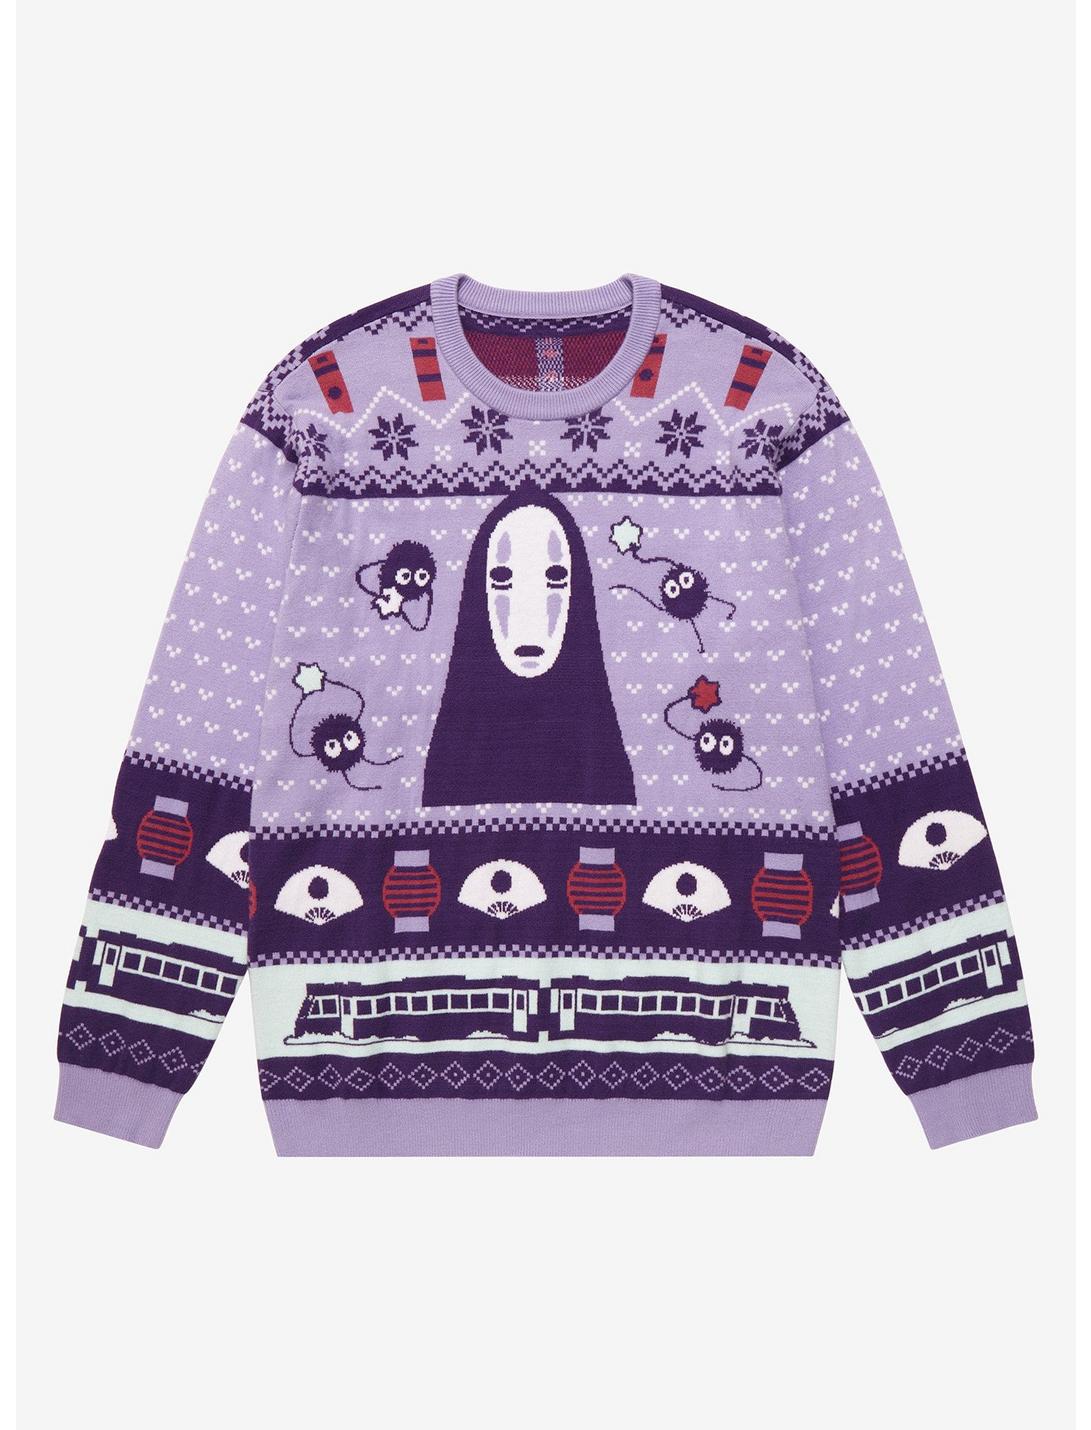 Studio Ghibli Spirited Away No-Face Holiday Sweater - BoxLunch Exclusive , LAVENDER, hi-res